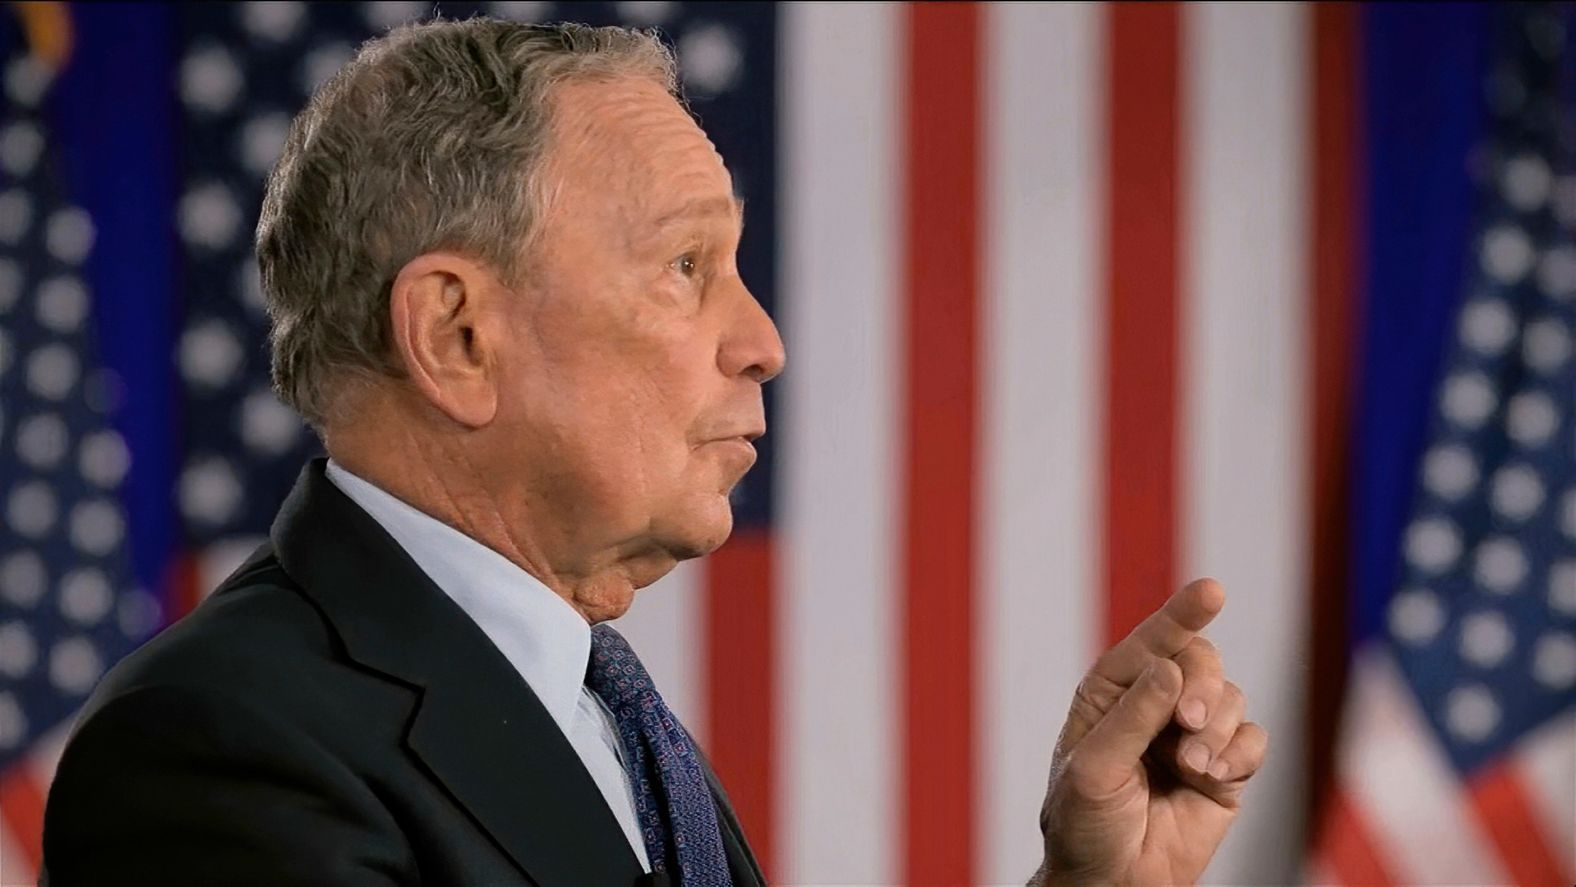 Former New York City Mayor Michael Bloomberg speaks on Thursday. "Four years ago I came before this convention and said, New Yorkers know a con when we see one," <a href="index.php?page=&url=https%3A%2F%2Fwww.cnn.com%2Fpolitics%2Flive-news%2Fdnc-2020-day-4%2Fh_5fd873e319ad1f7240f8874febbf188d" target="_blank">Bloomberg said.</a> "But tonight I'm not asking you to vote against Donald Trump because he's a bad guy. I'm urging you to vote against him because he's done a bad job."